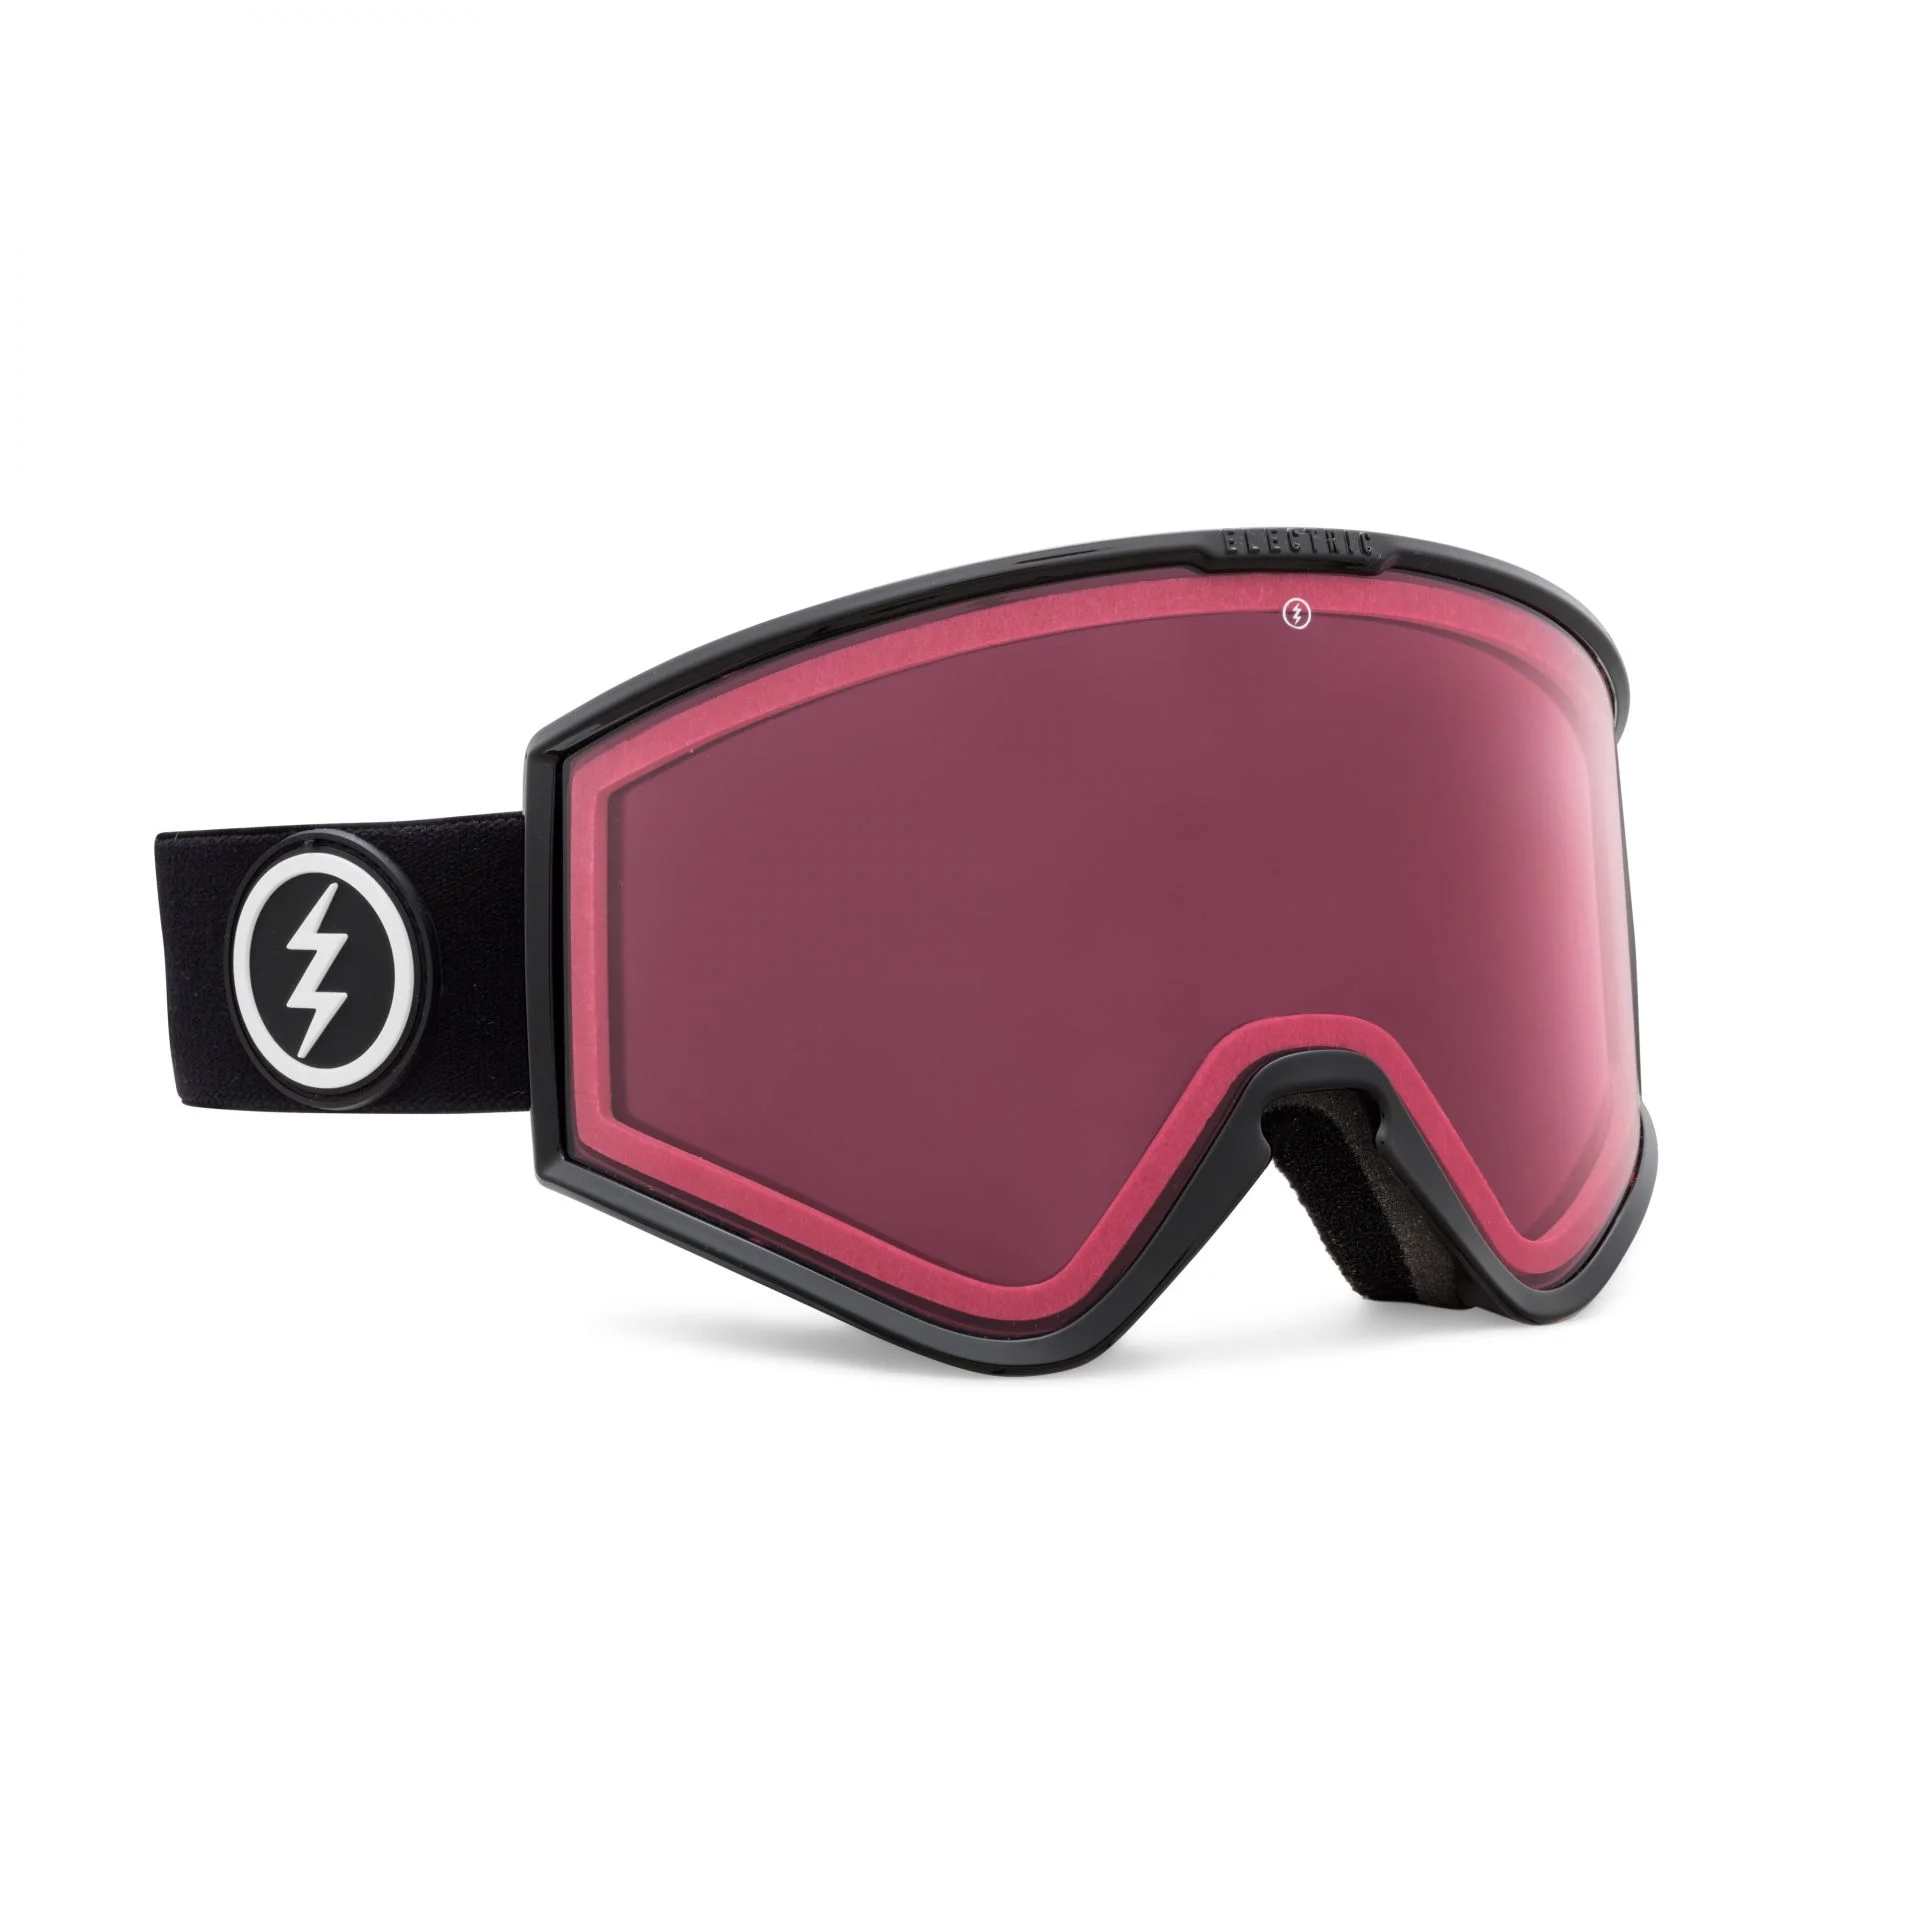 Electric Kleveland Gloss Black / Photochromic Rose - Behind the Pines